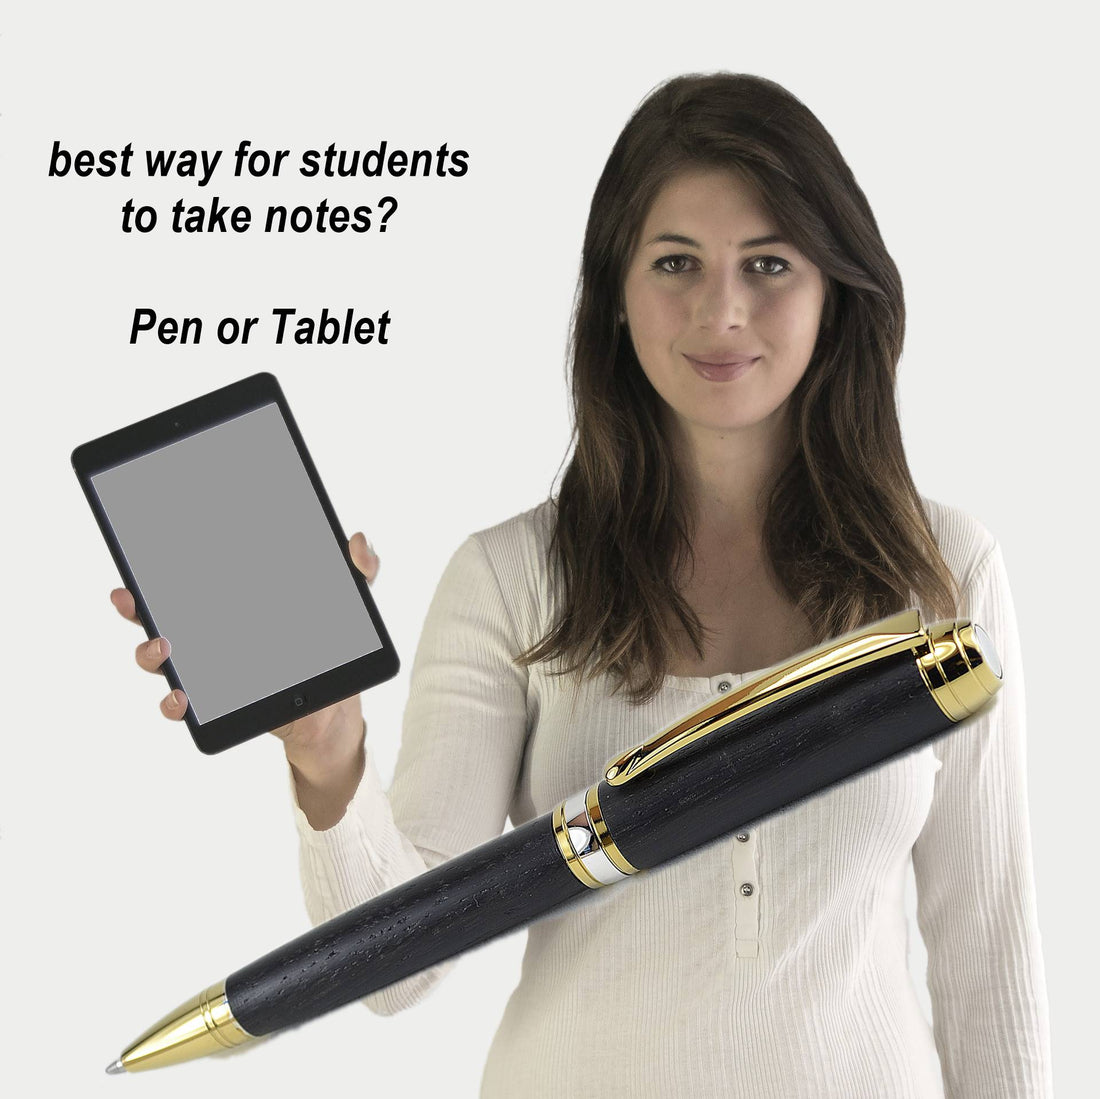 Note-taking: pen and paper versus the laptop